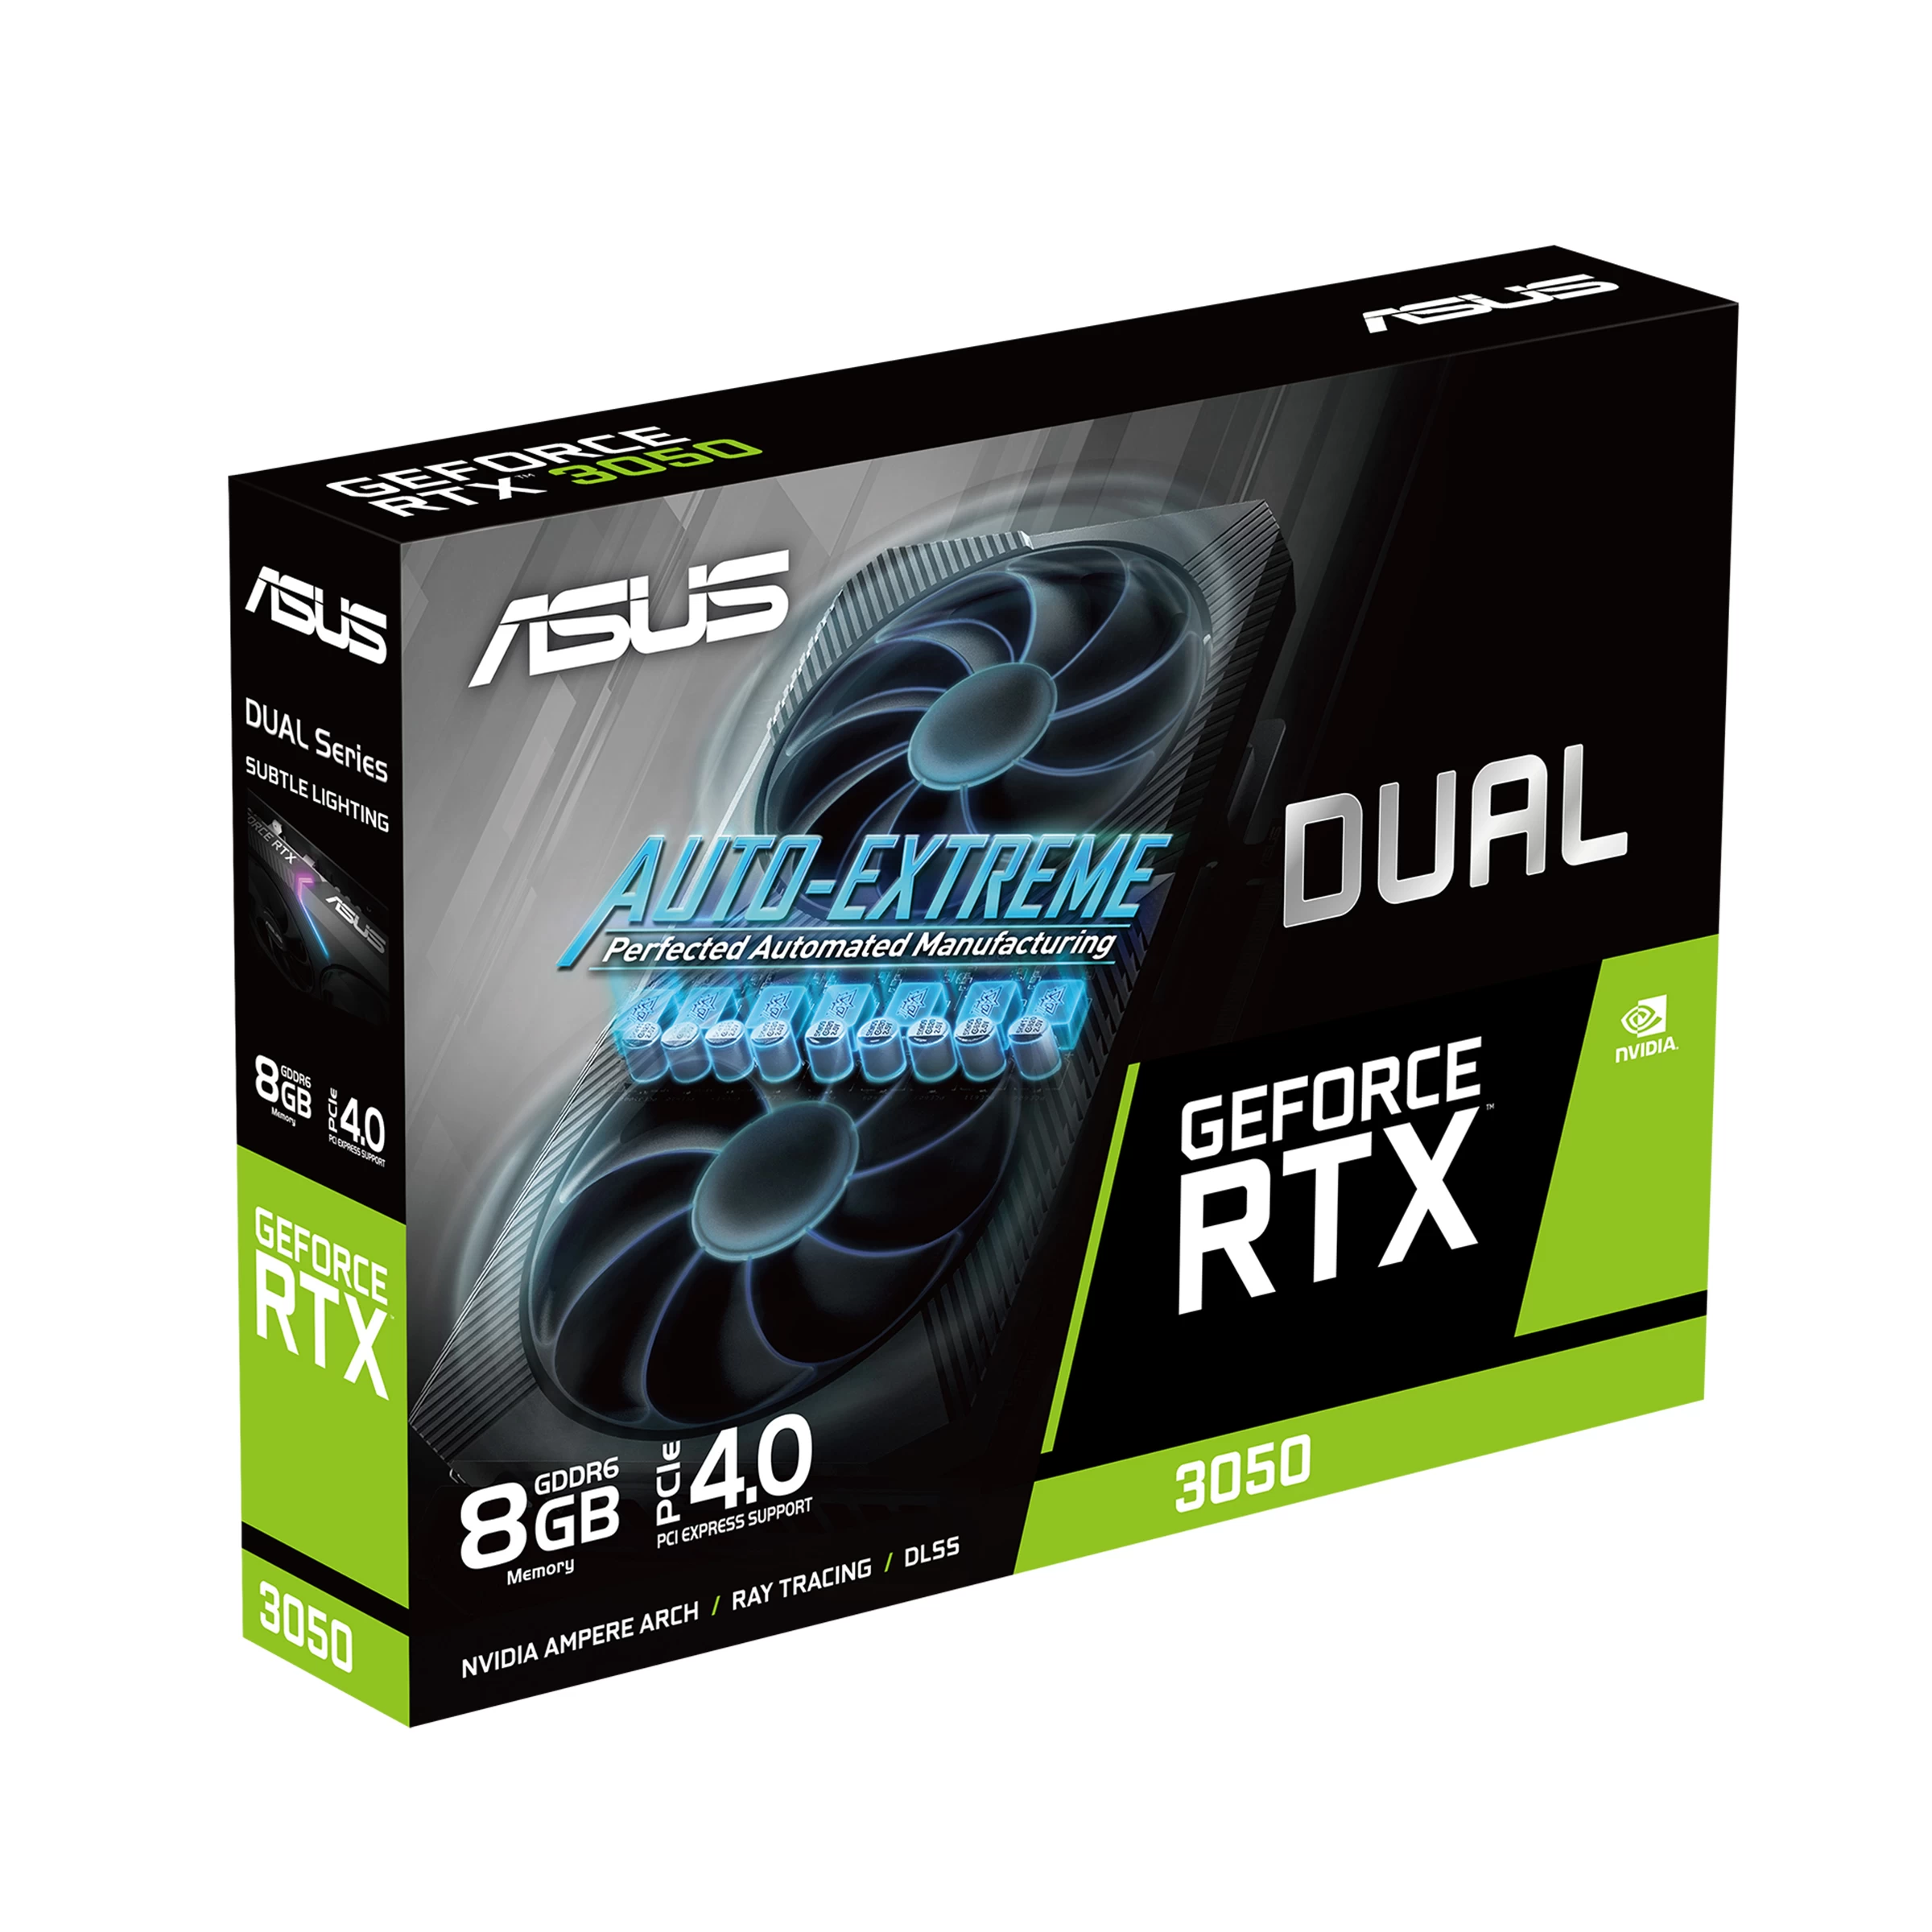 ASUS Dual GeForce RTX 3050 8GB GDDR6 Package Content